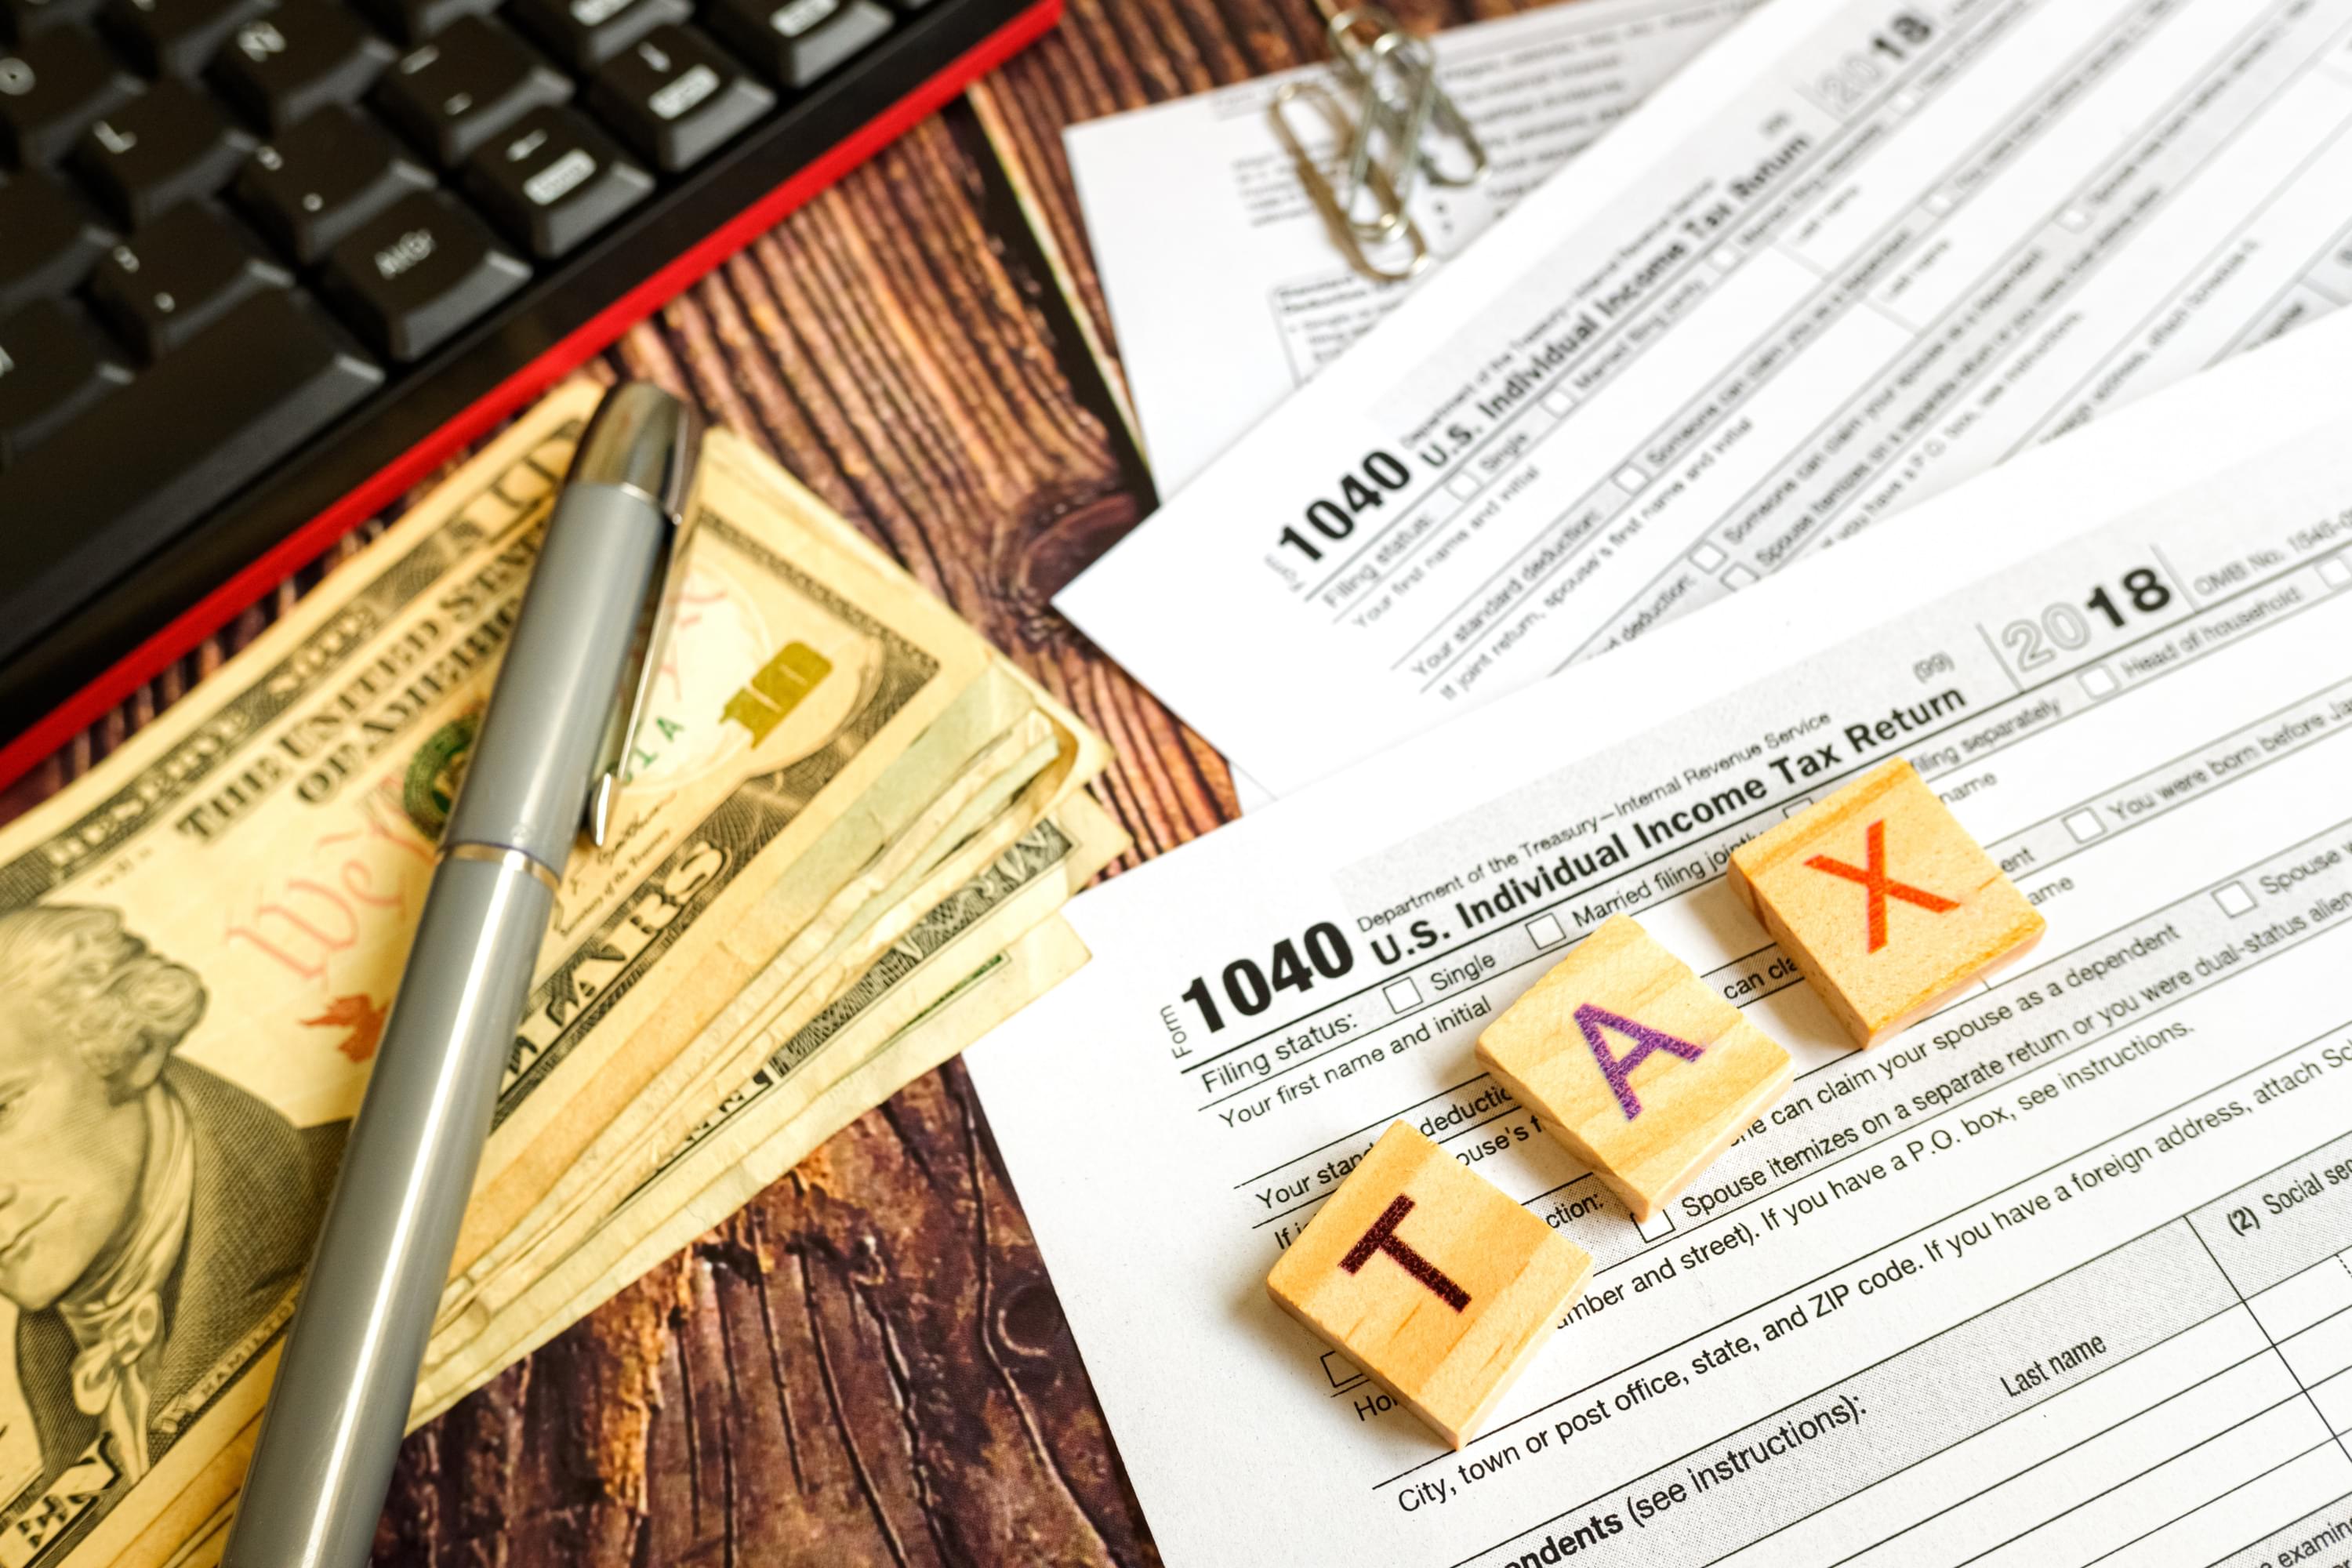 CPATaxSolver discusses what to do with unfiled tax returns